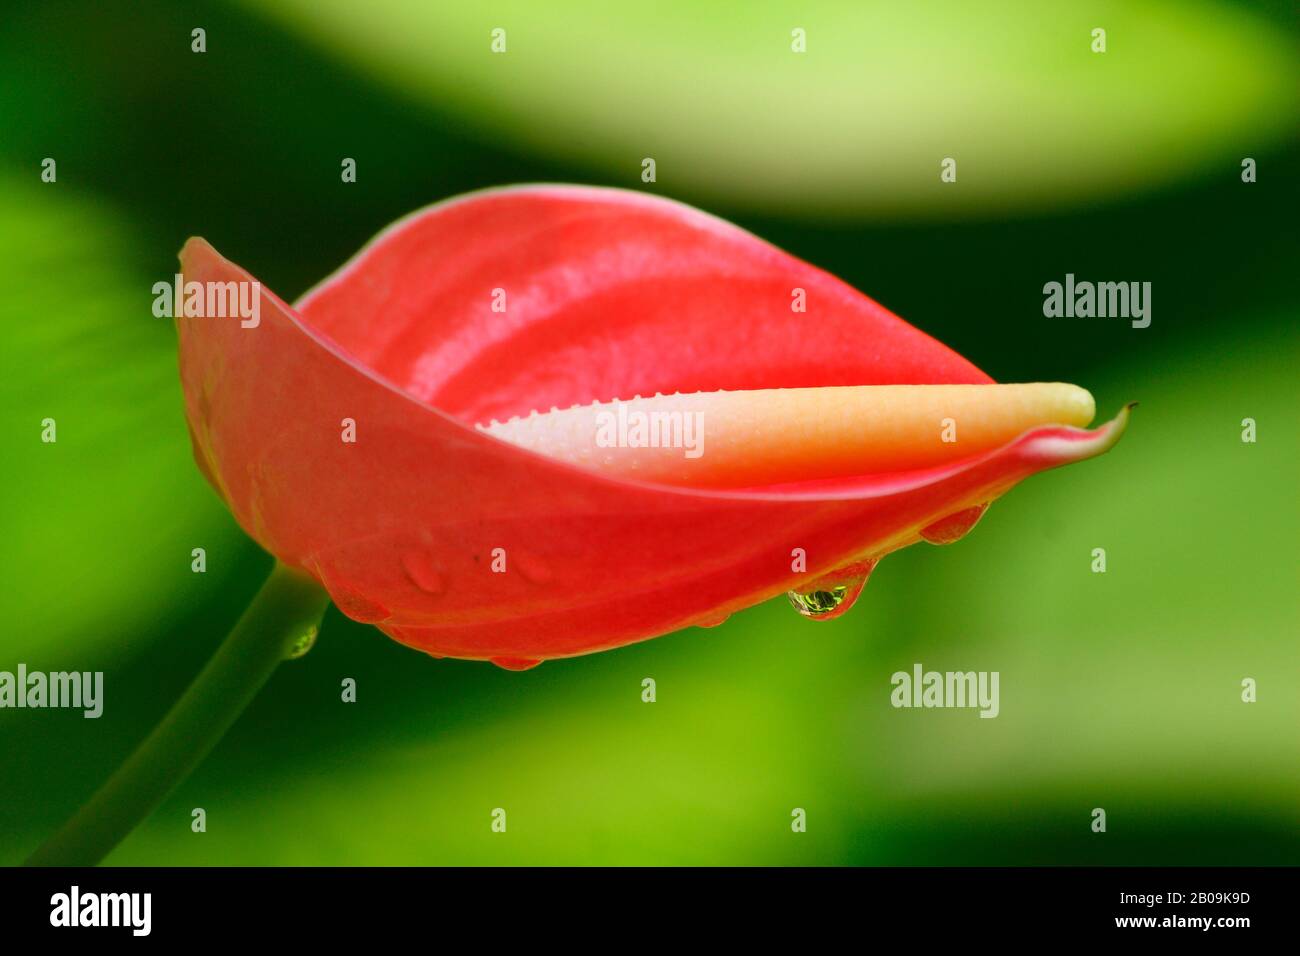 An Anthurium flower (Anthurium andraeanum) also known as Flamingo Lily, in Dhaka, Bangladesh. October 10, 2008. Stock Photo